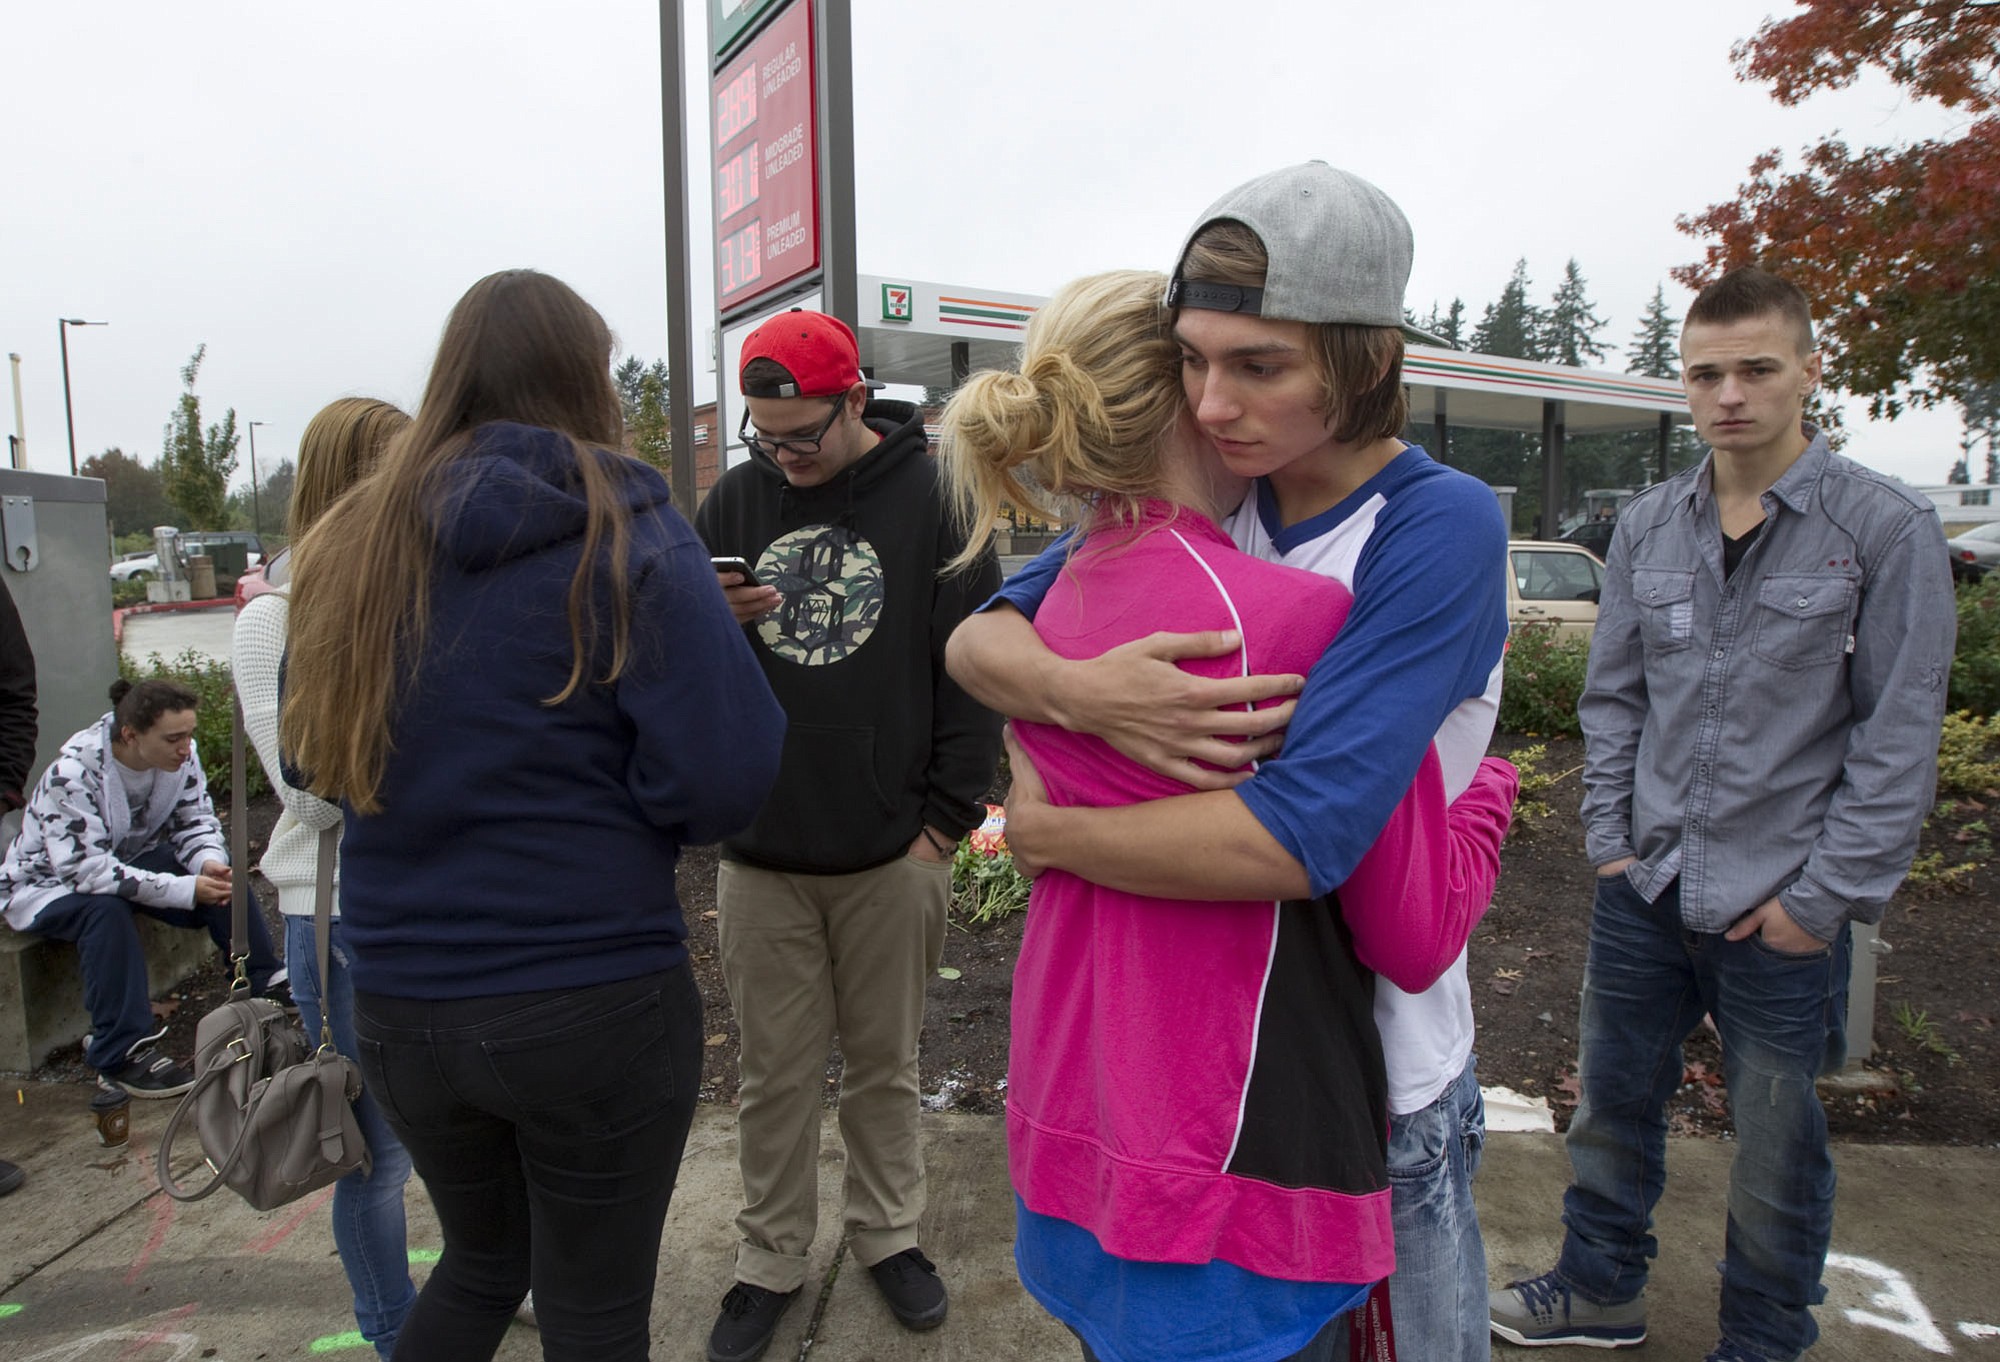 Mountain View High School students Daisy Garcia and Mark Hall hug as the two mourn their friends, who died Friday night in a car crash at the corner of Northeast 136th Avenue and Fourth Street.